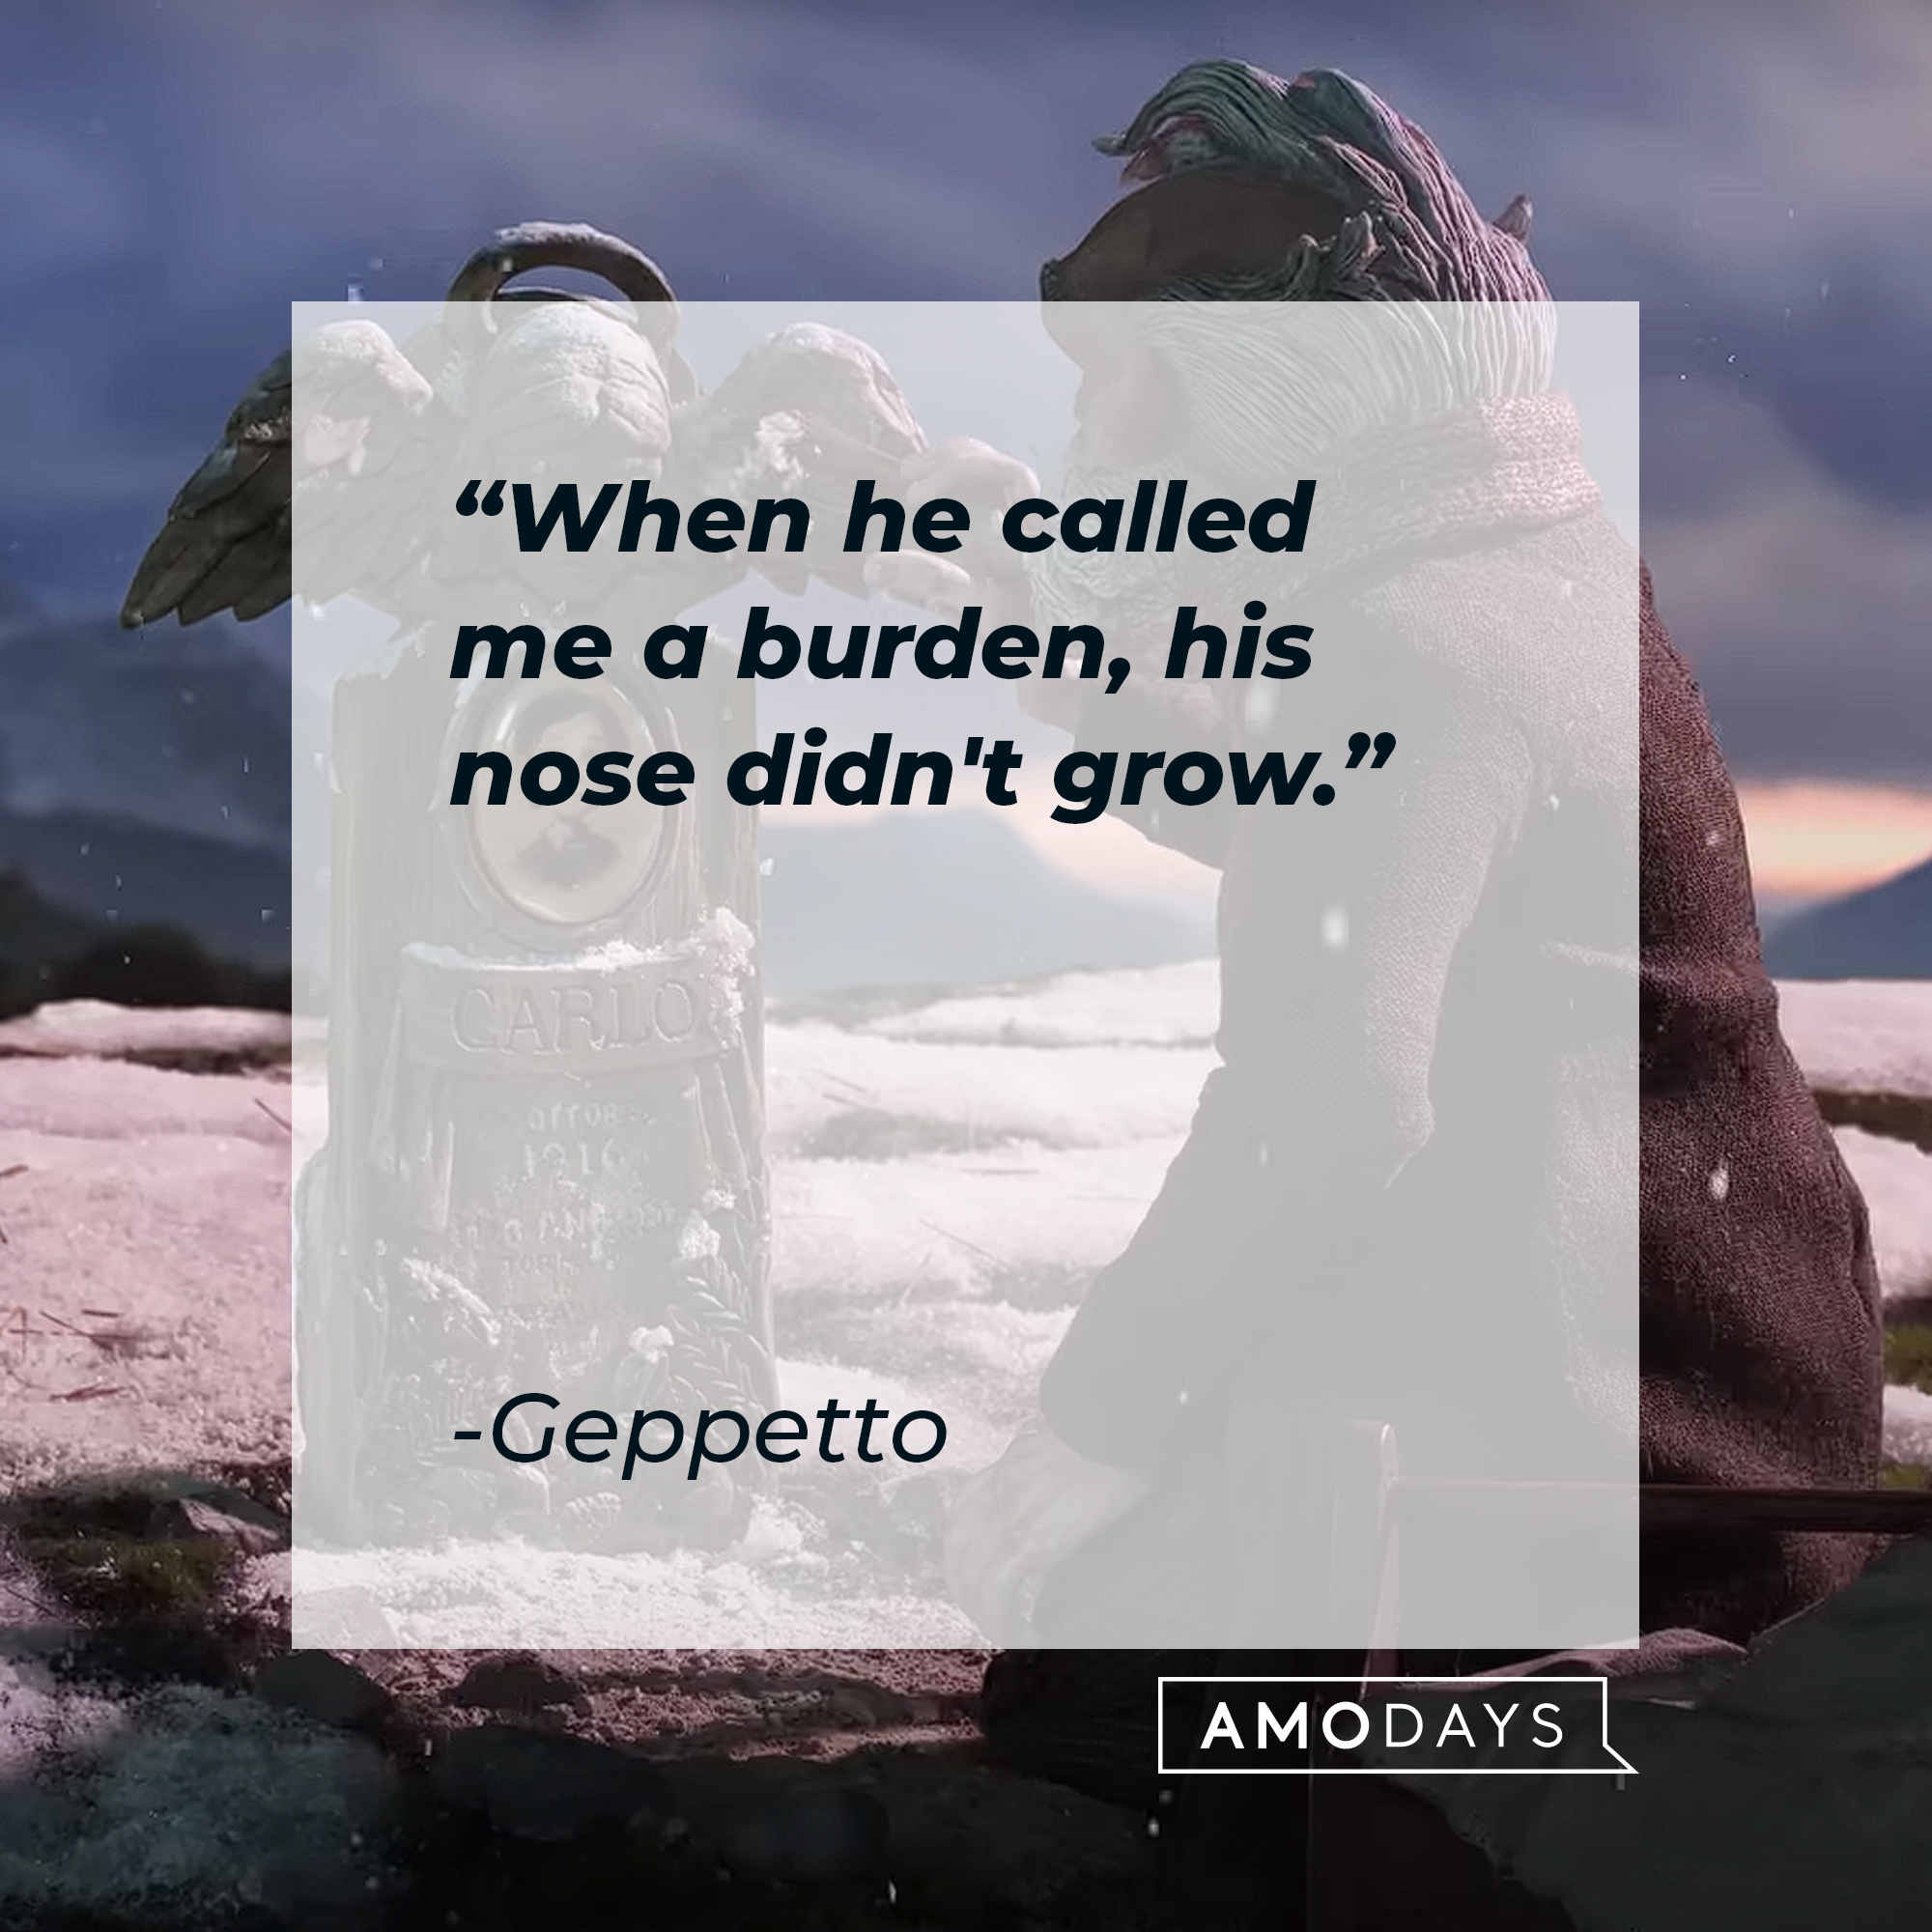 Geppetto's quote: "When he called me a burden, his nose didn't grow." | Image: AmoDays